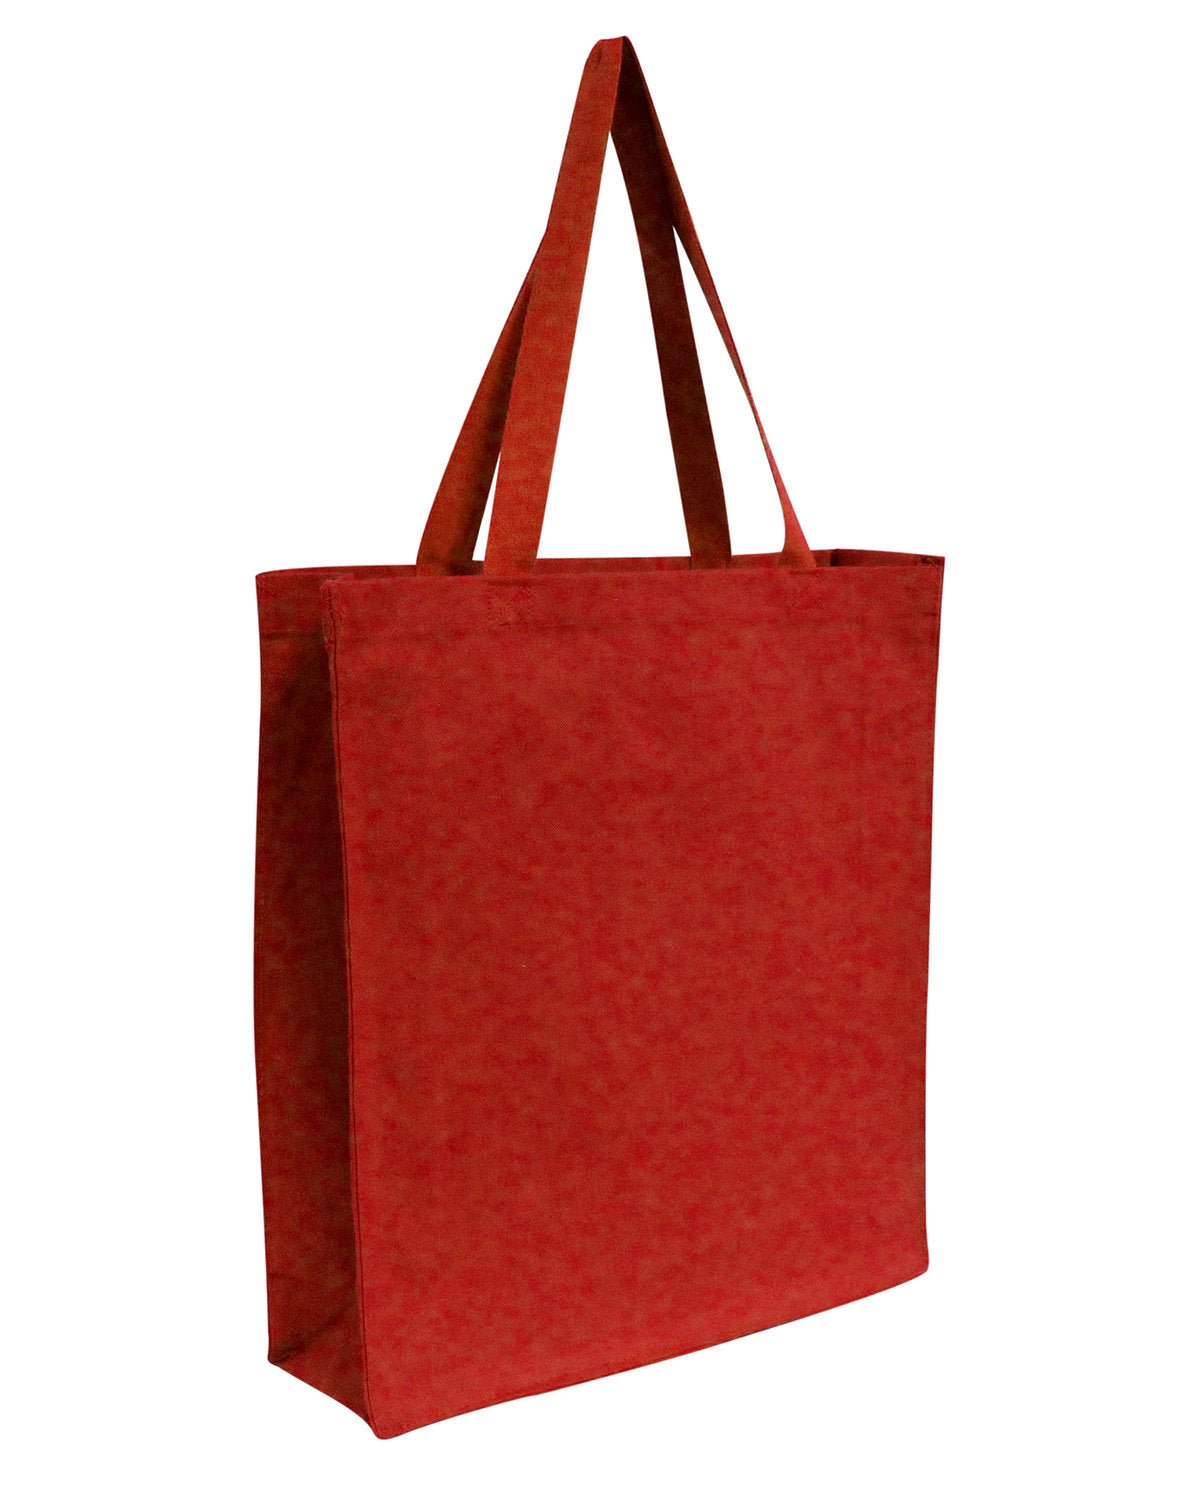 OAD100-OAD-RED-OAD-Bags and Accessories-1